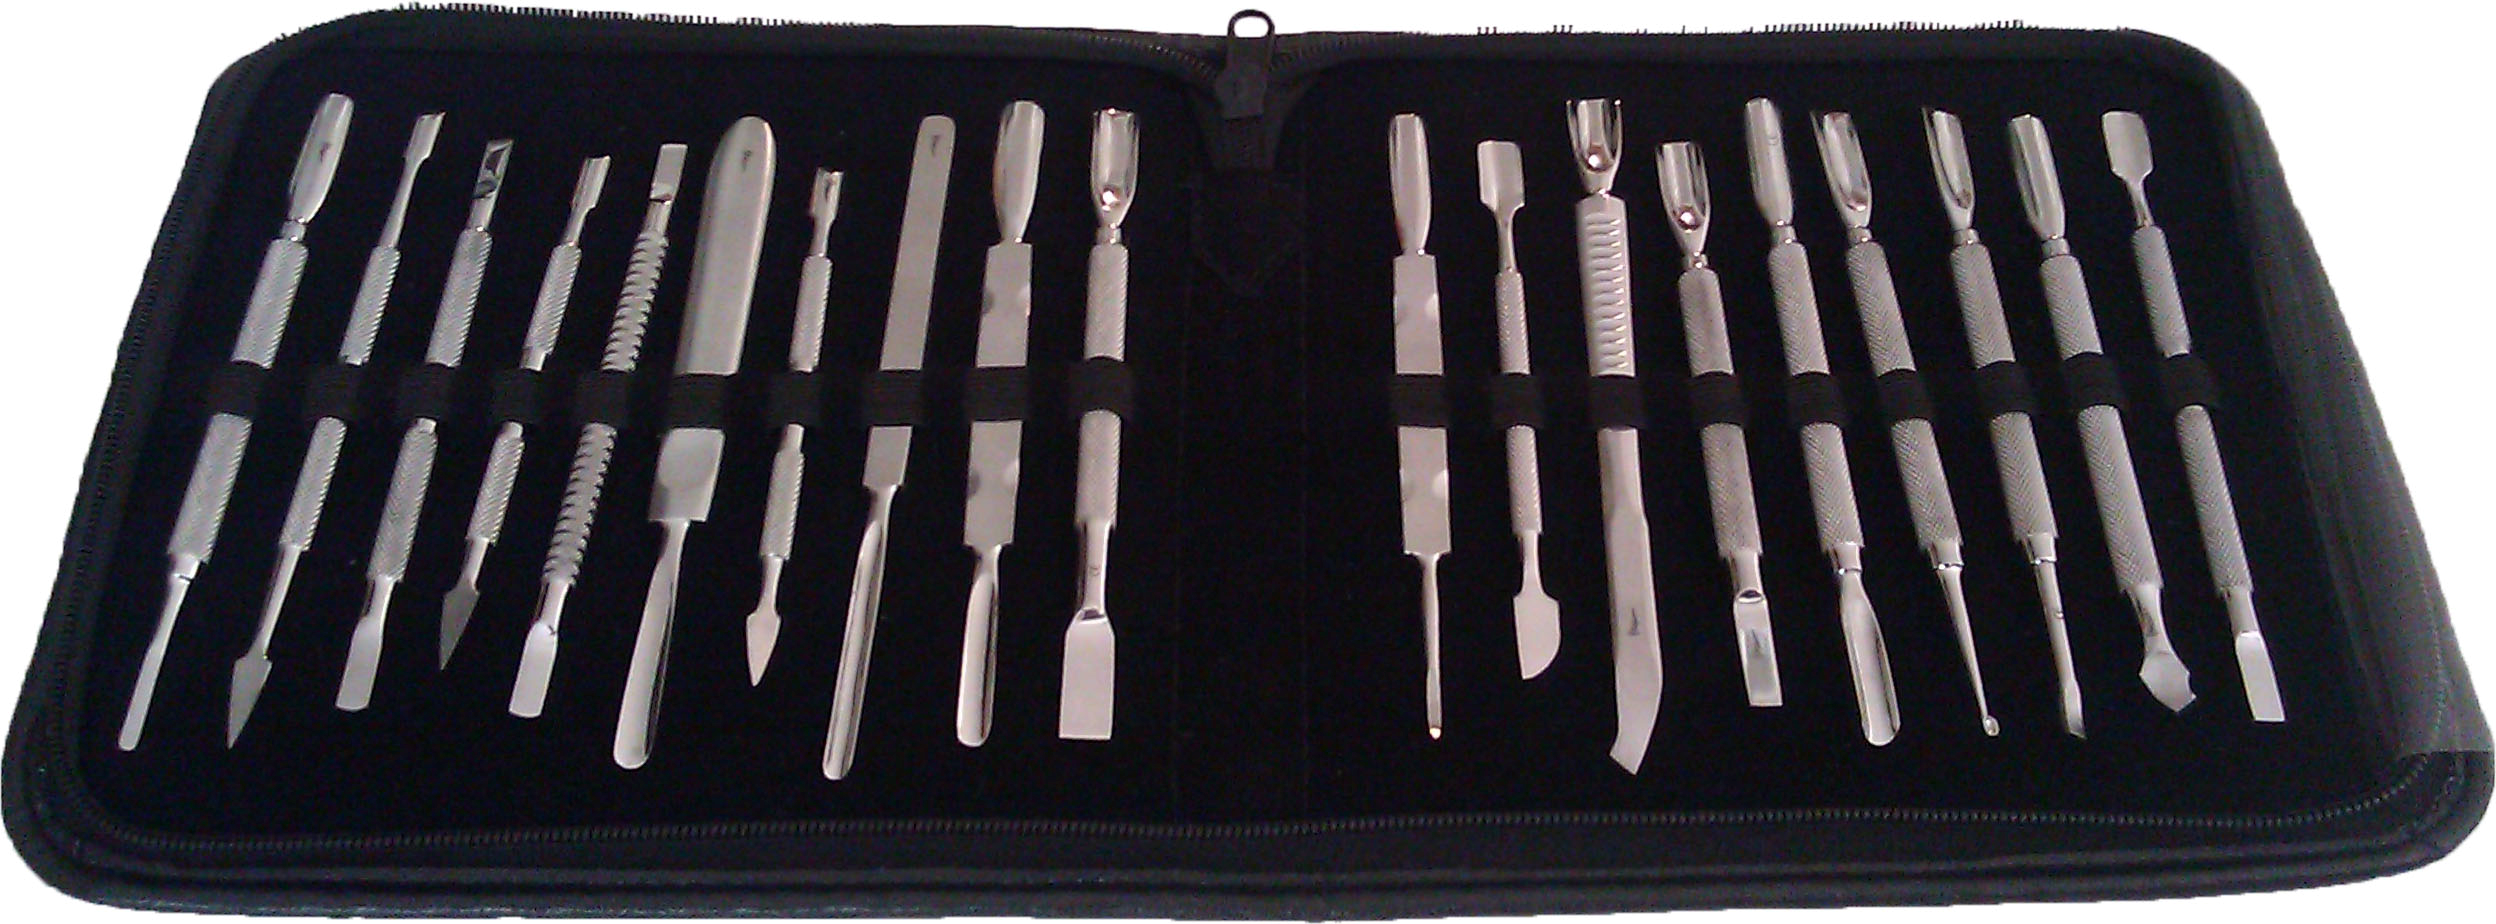 19pc Cuticle Pusher Set Limited Edition